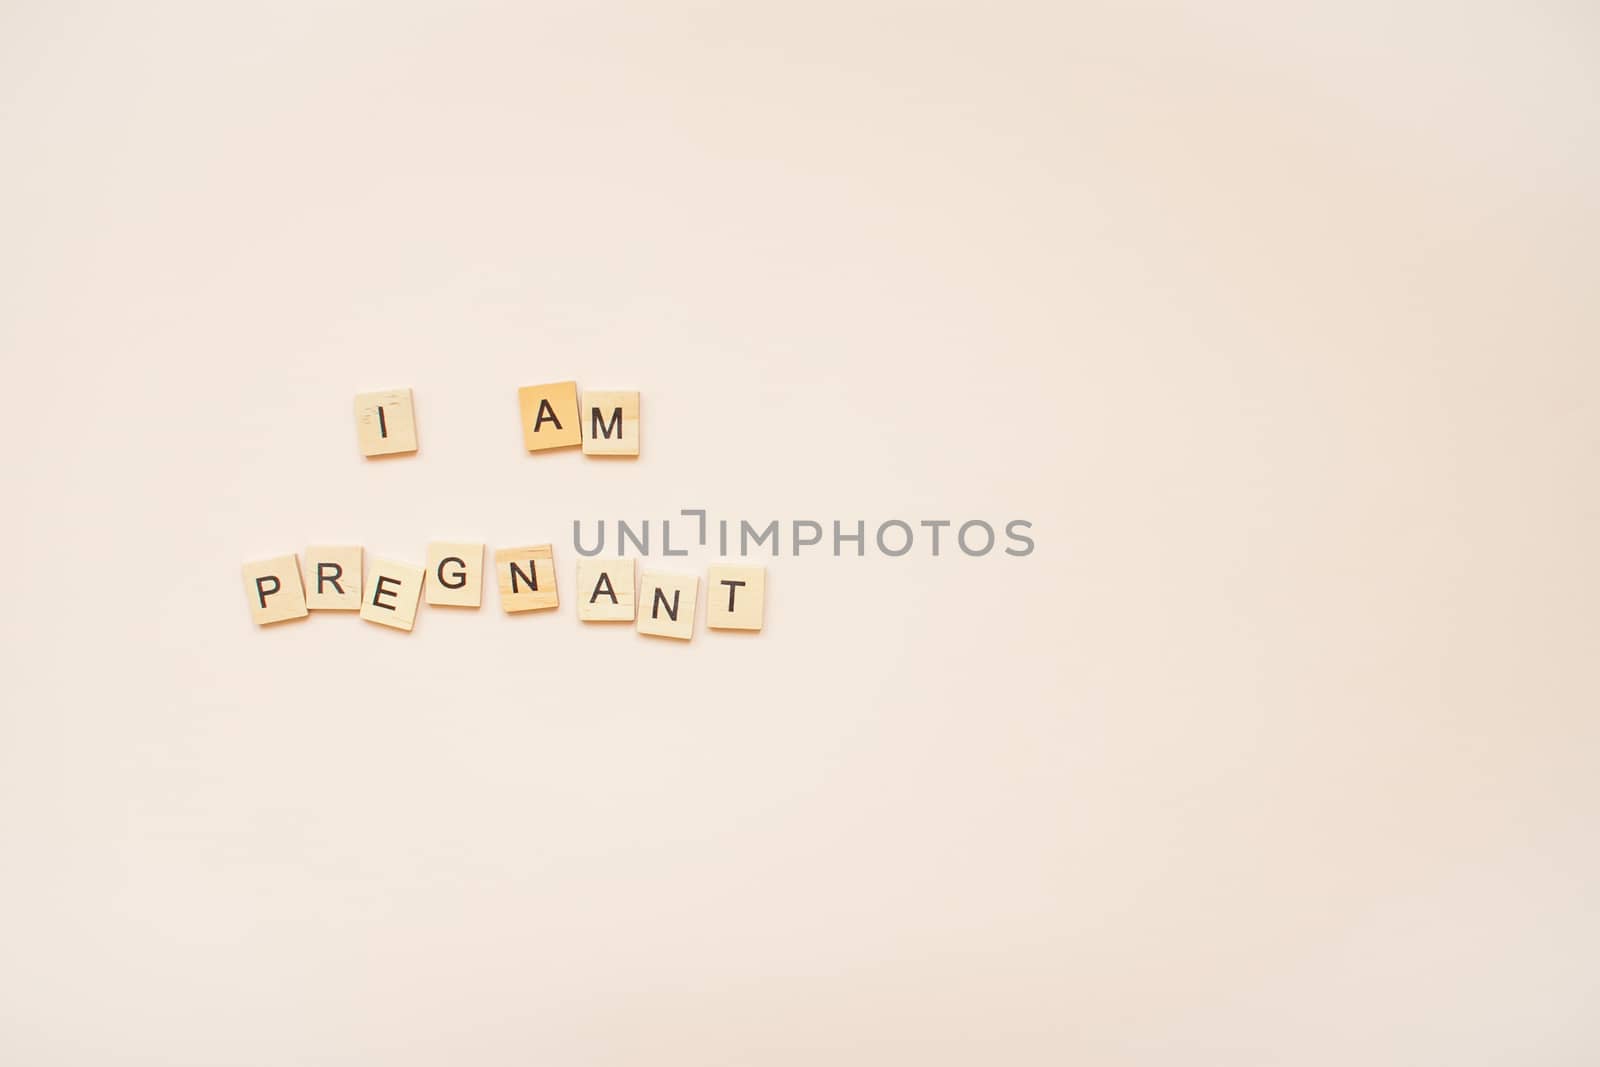 The inscription "I am pregnant" made of wooden blocks on a light pink background.